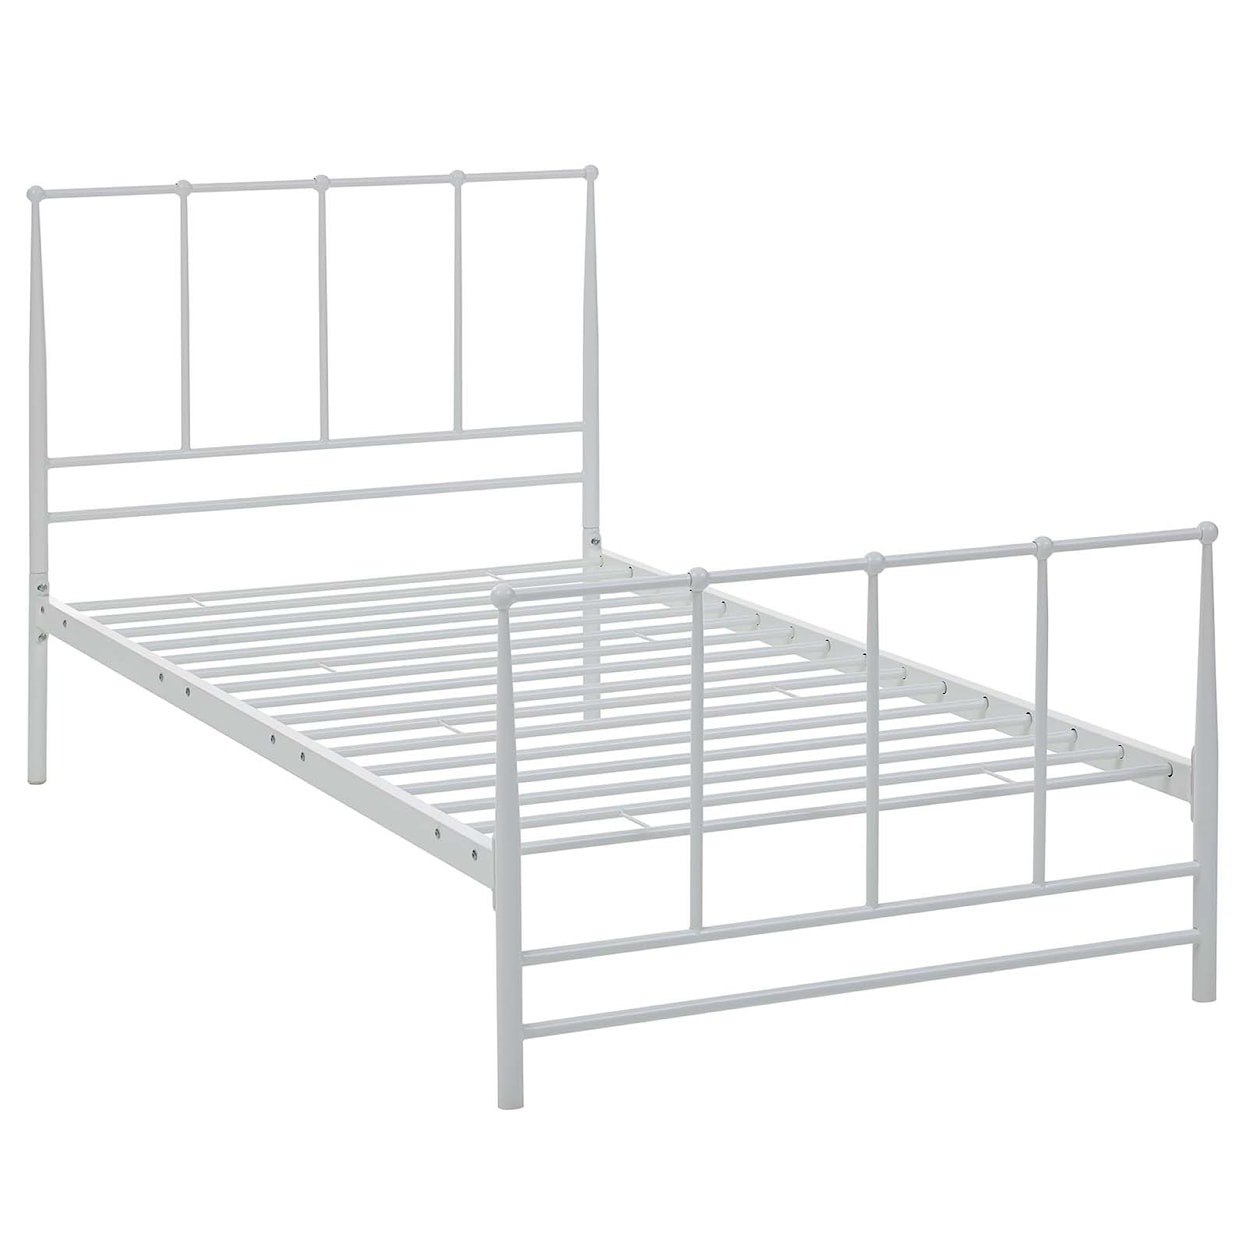 Modway Estate Twin Bed